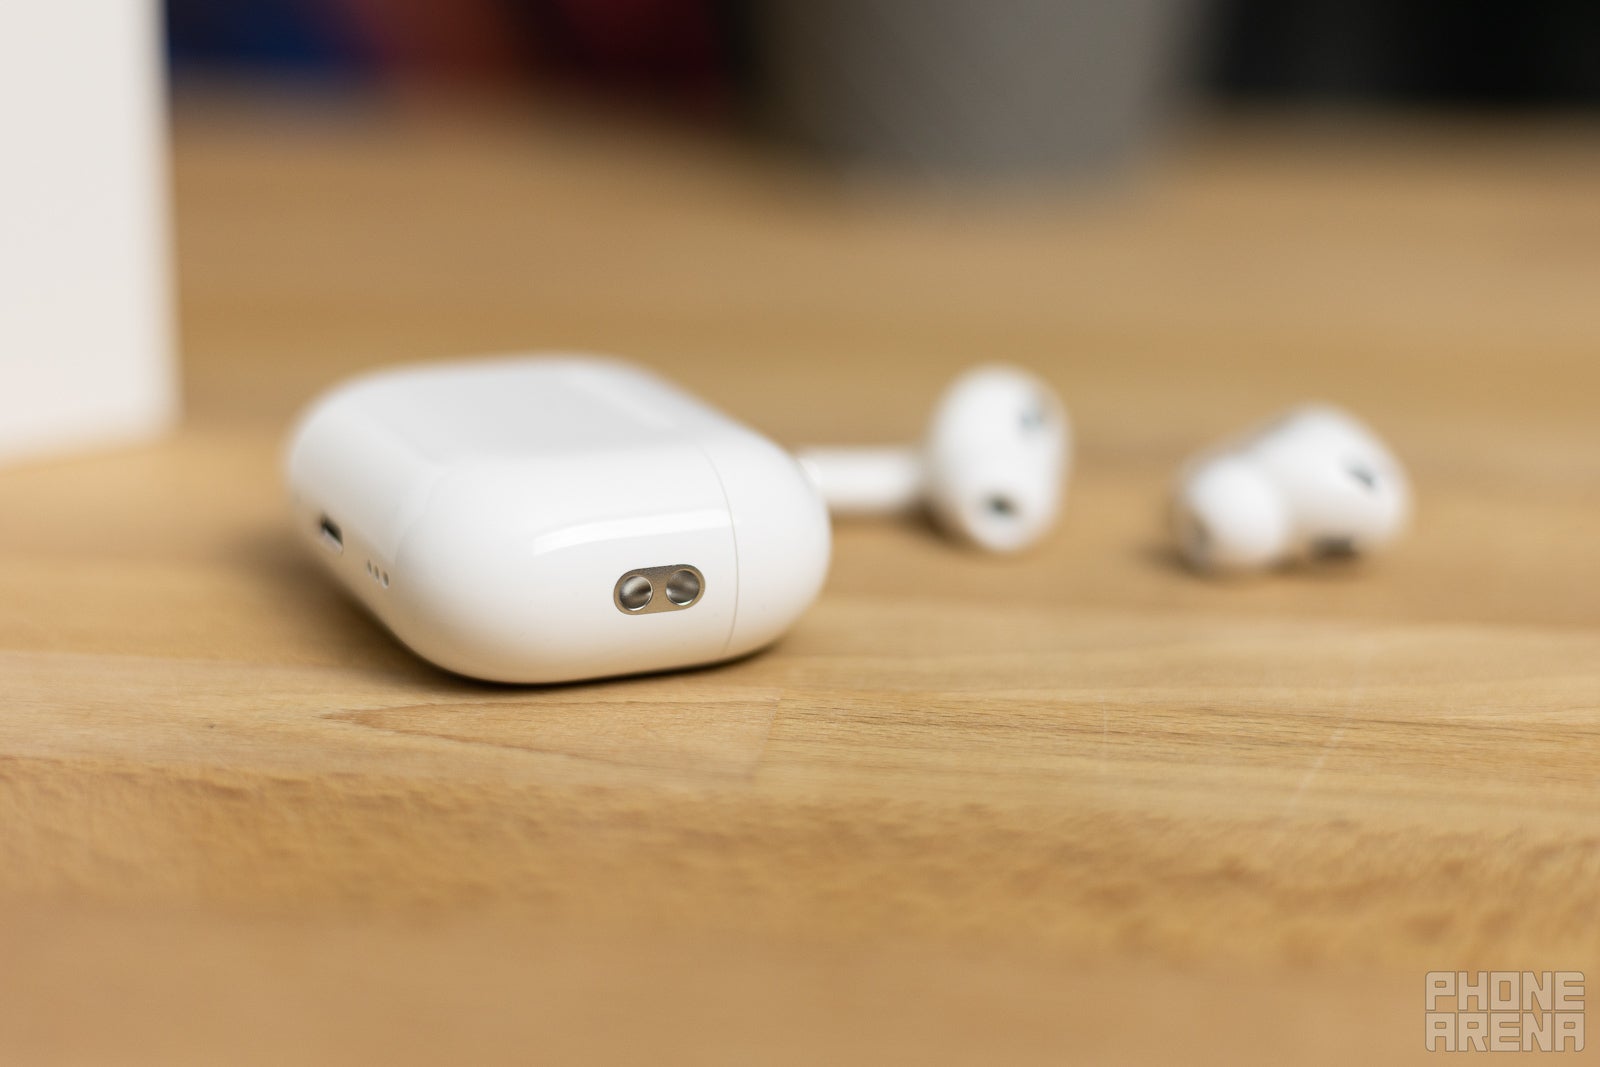 Apple AirPods Pro Vs AirPods: What's The Difference?